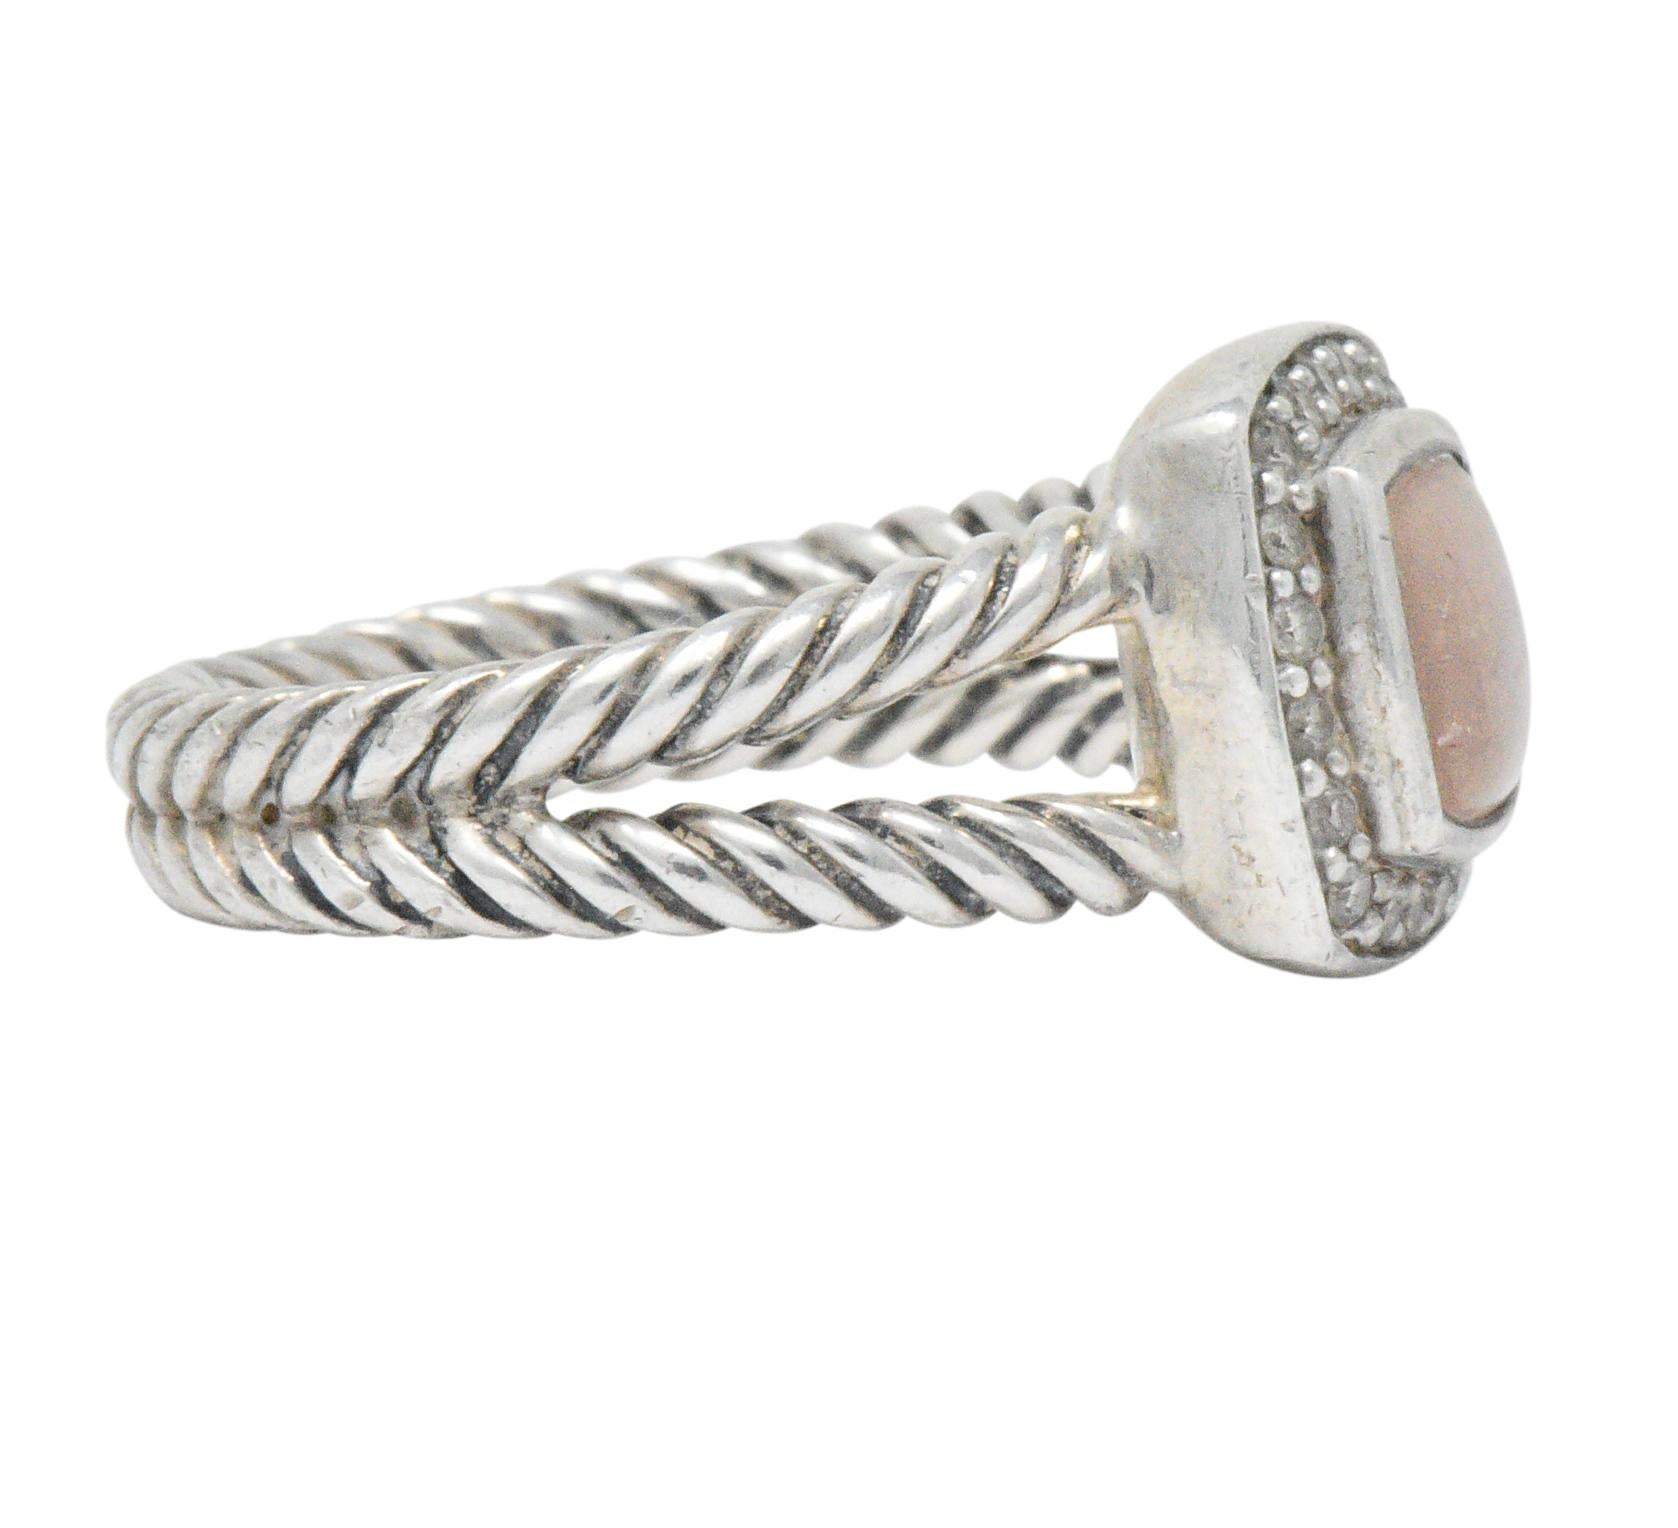 Centering a cushion shaped crystal-topped pink mother of pearl

Bezel set and surrounded by diamonds weighing approximately 0.17 carats total, eye-clean and white

Cable twist silver split shank

From Albion collection

Signed DY for David